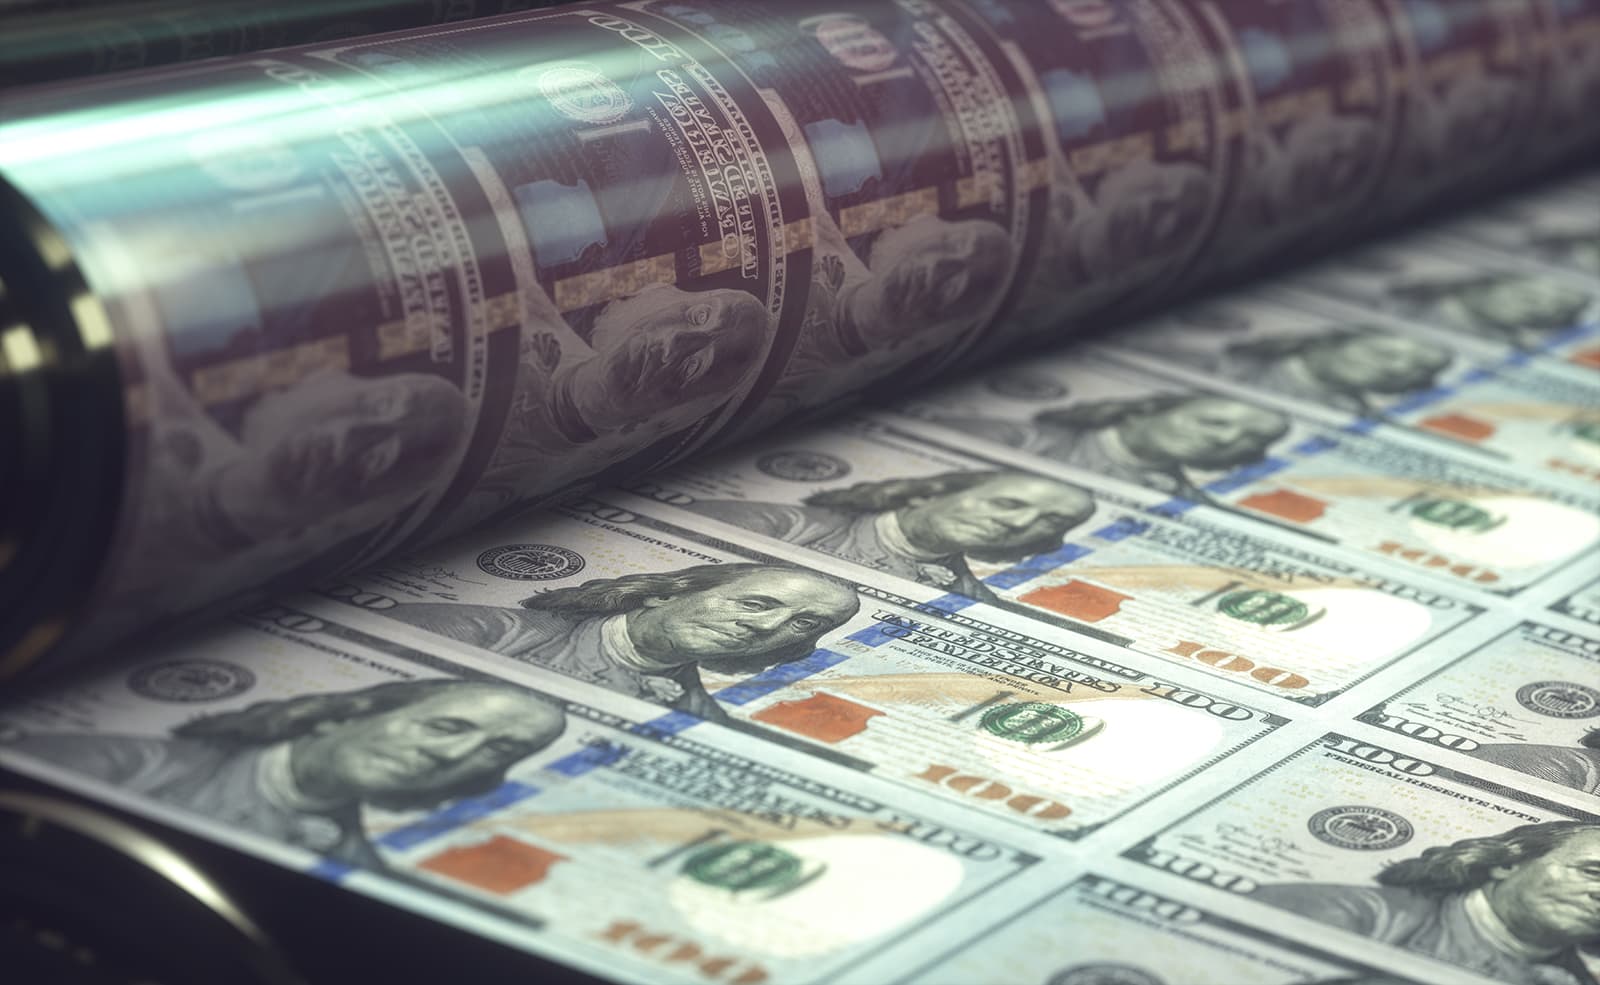 printing money is another sign of a dying society